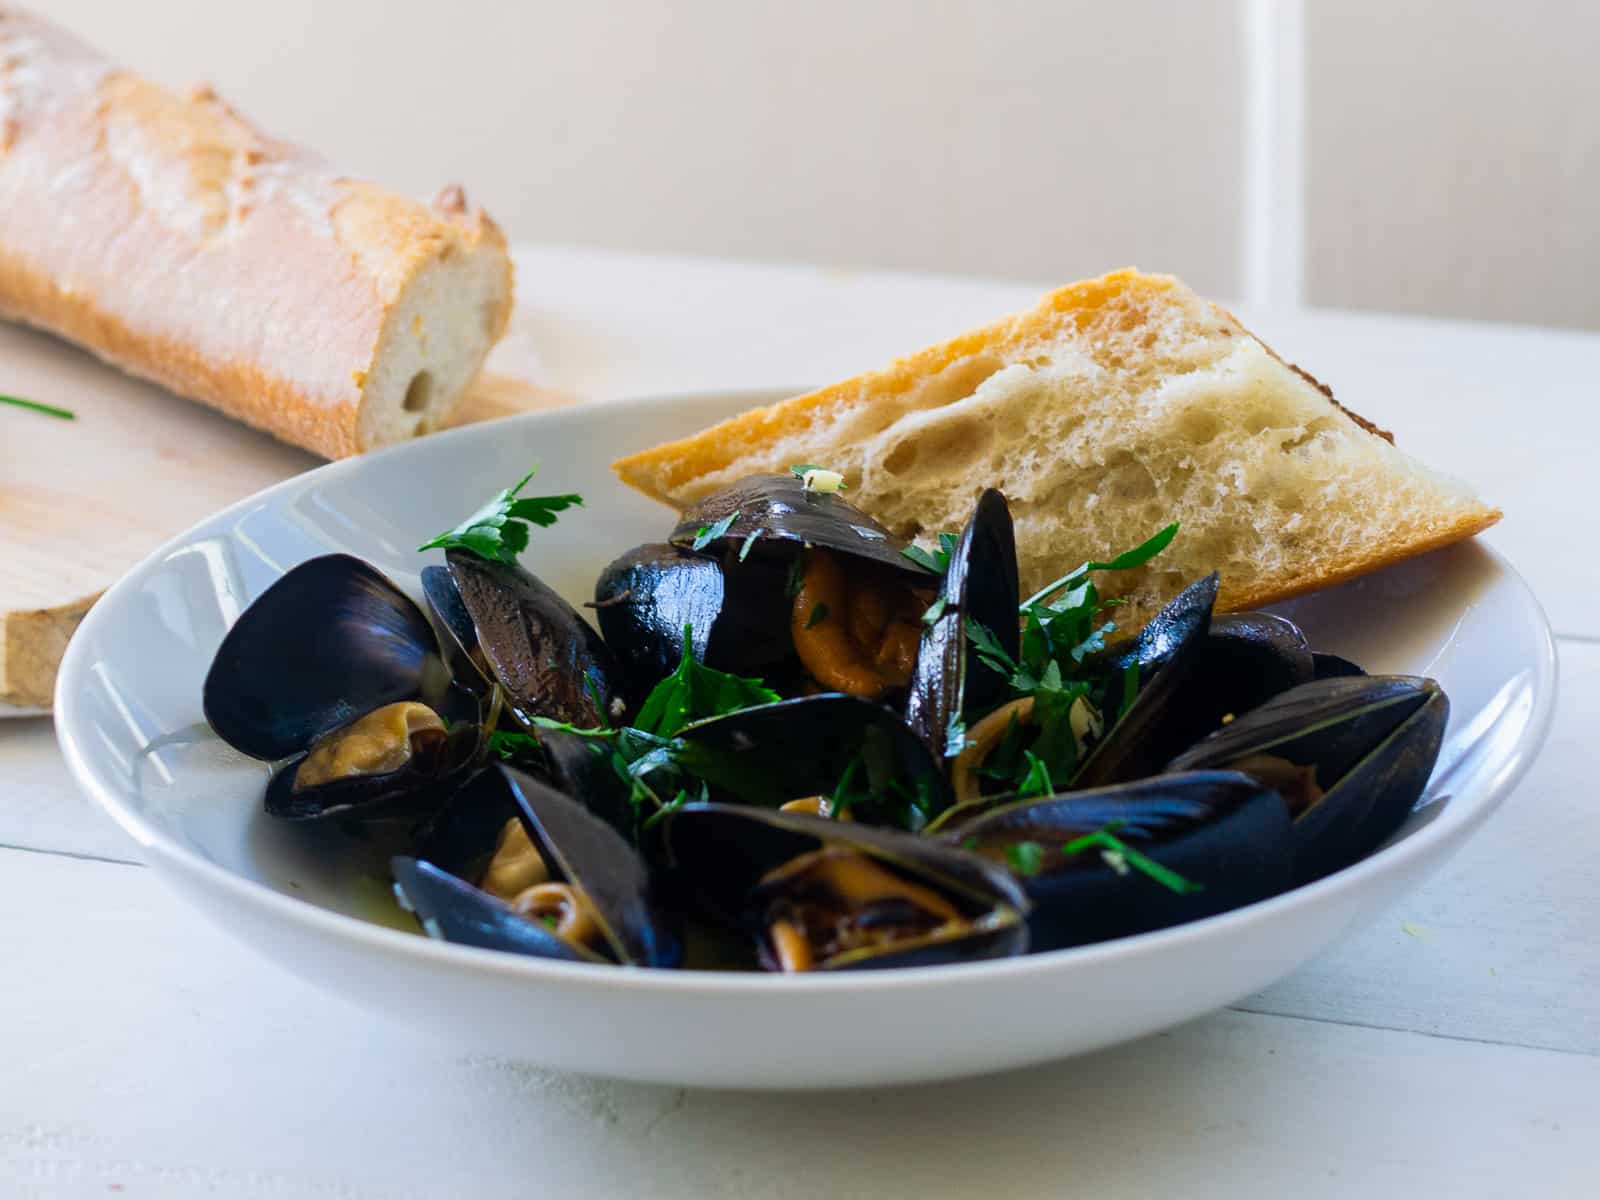 French mussels mariniere recipe served with bread for dipping.